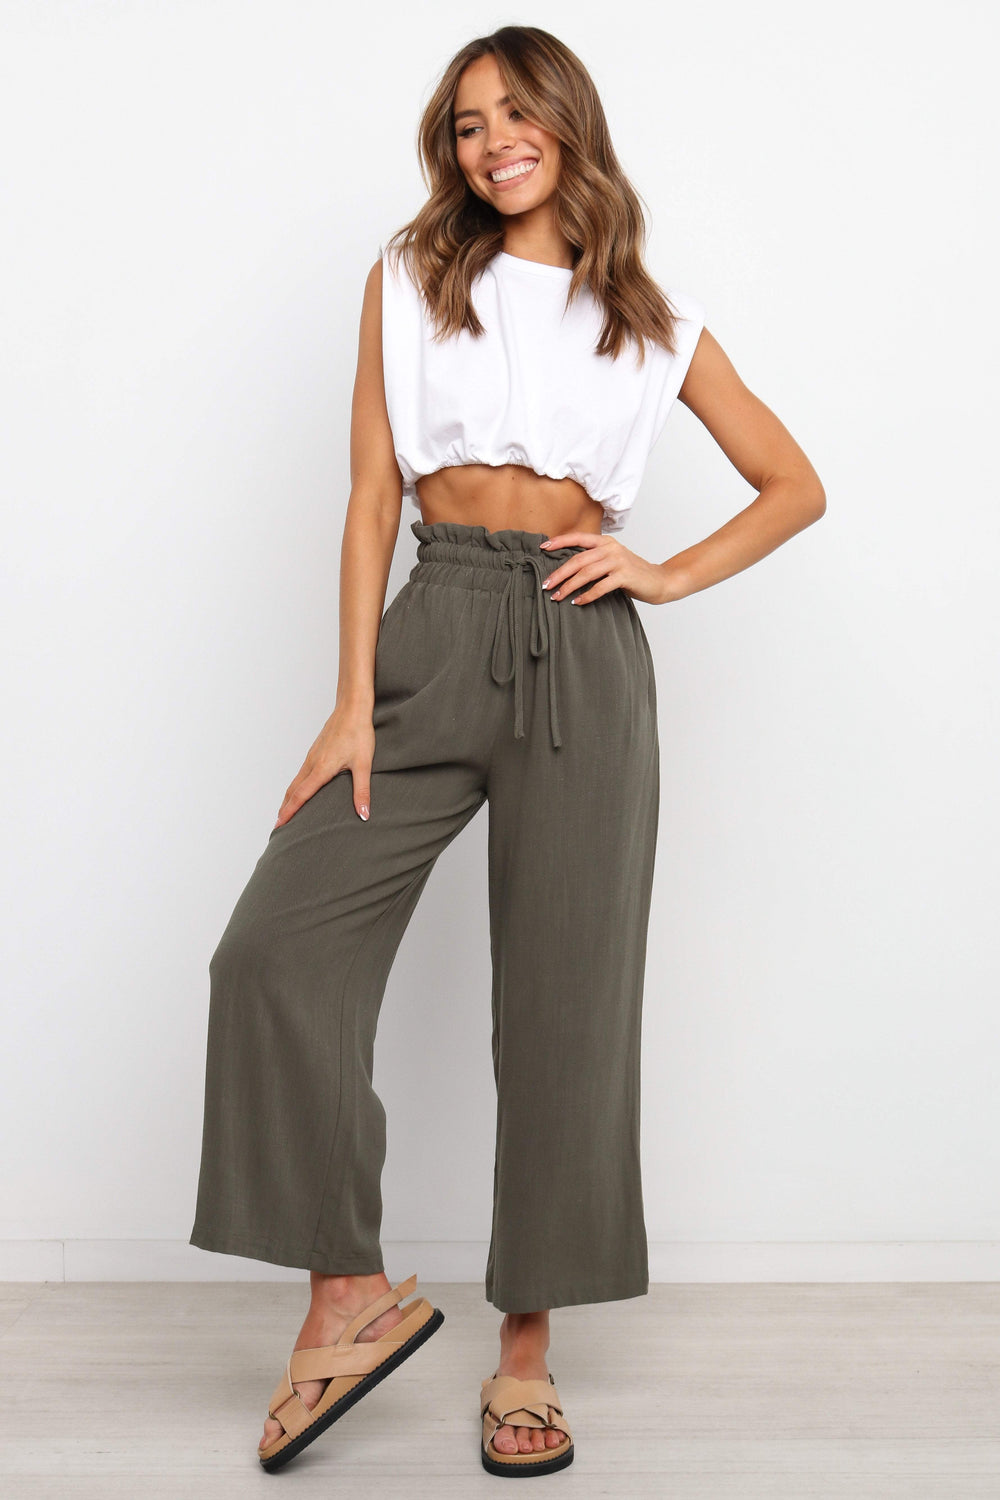 JDEFEG Elderly Pants for Women Womens Wide Leg Palazzo Pants High Waisted  Pant Smocked Pleated Loose Fit Casual Trousers Womens Plus Size Olive Pants  Polyester,Cotton Coffee Xxl - Walmart.com